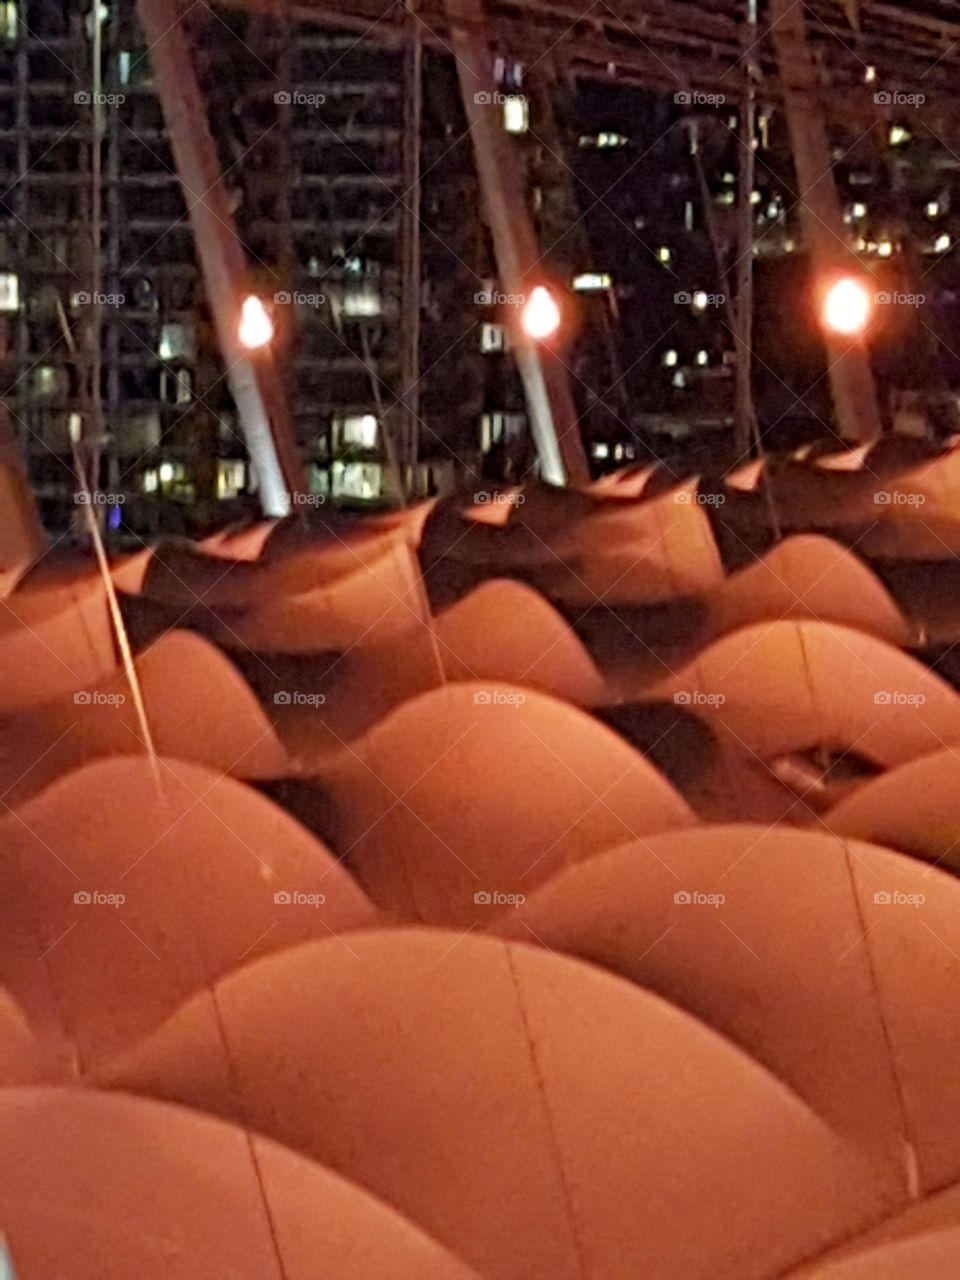 up close on BC Place roof